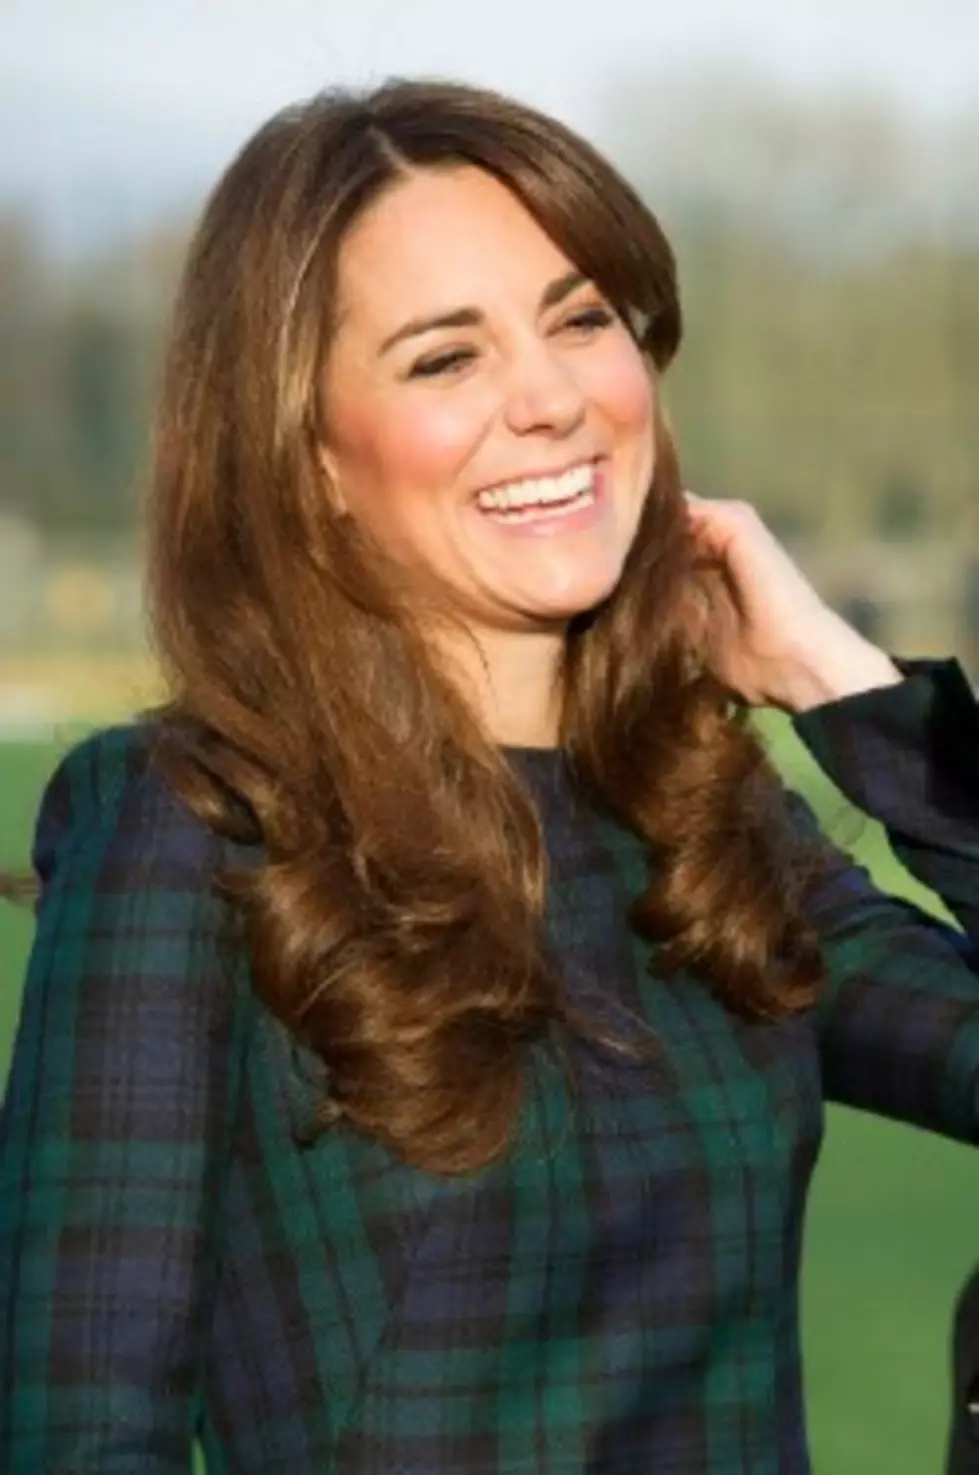 Kate Middleton and Prince William Are Expecting!